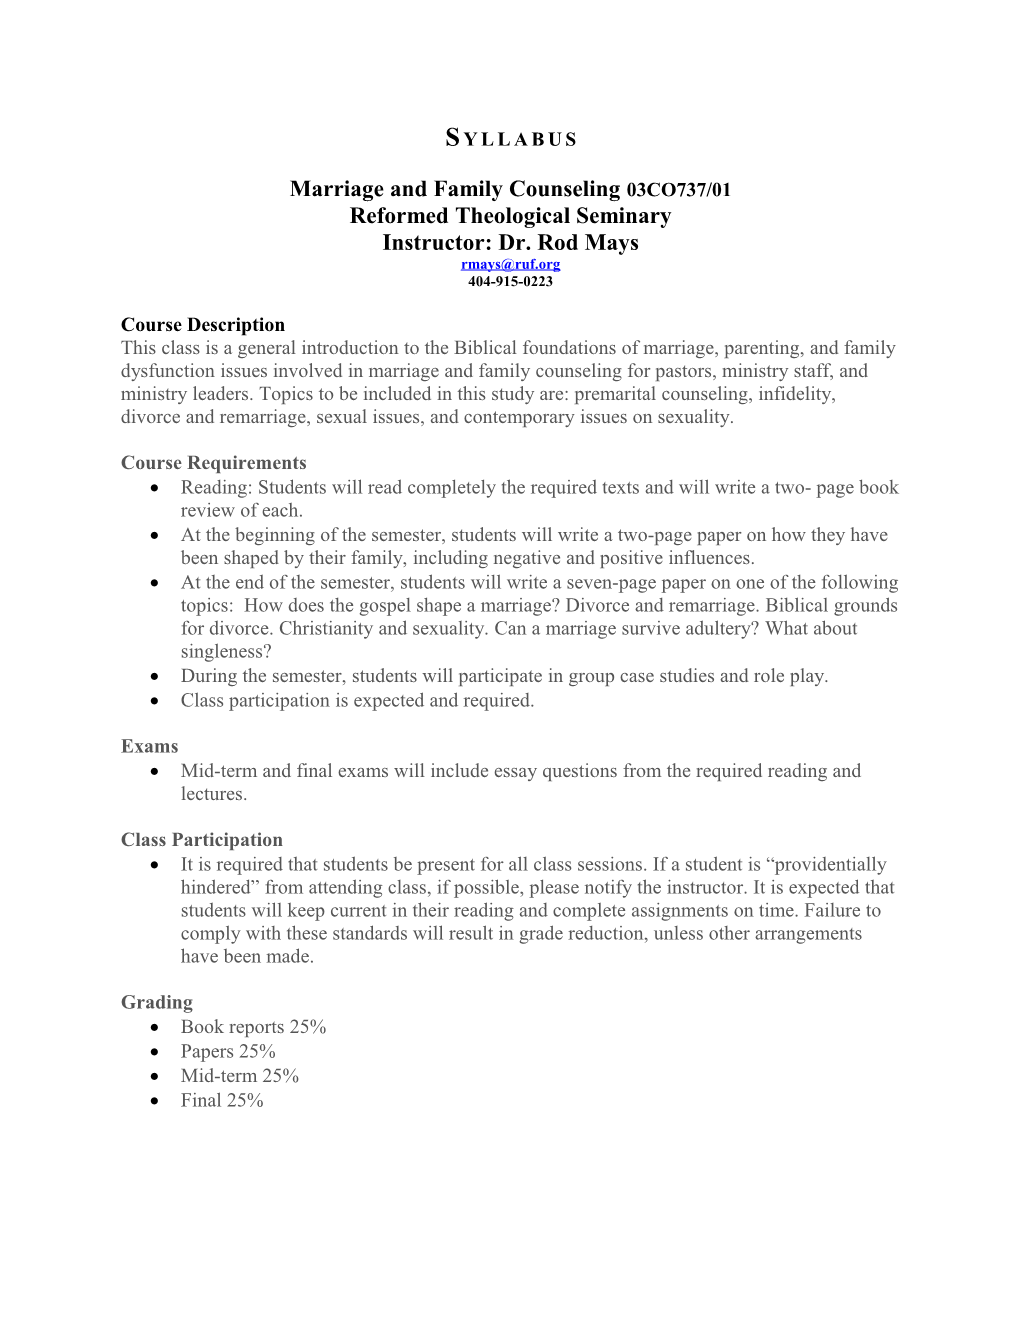 Marriage and Family Counseling03co737/01